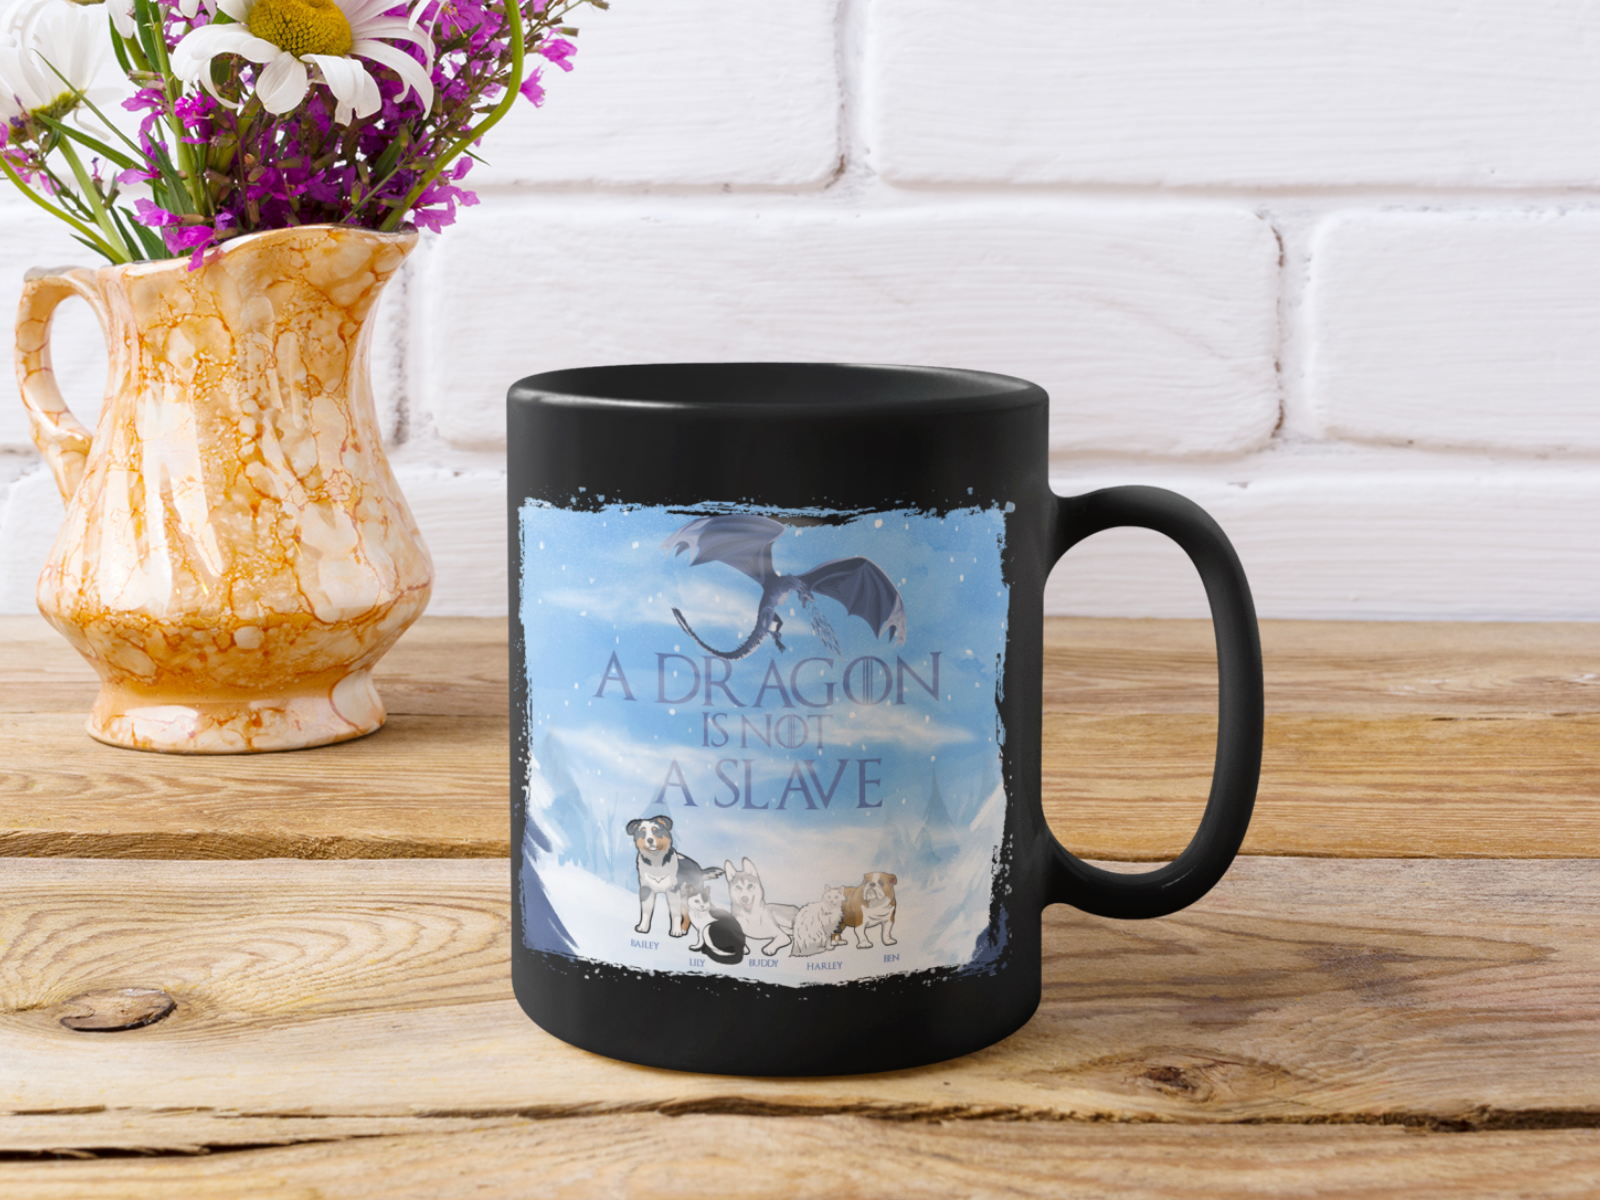 "A Dragon Is Not A Slave" Personalized Mug For Pet lovers